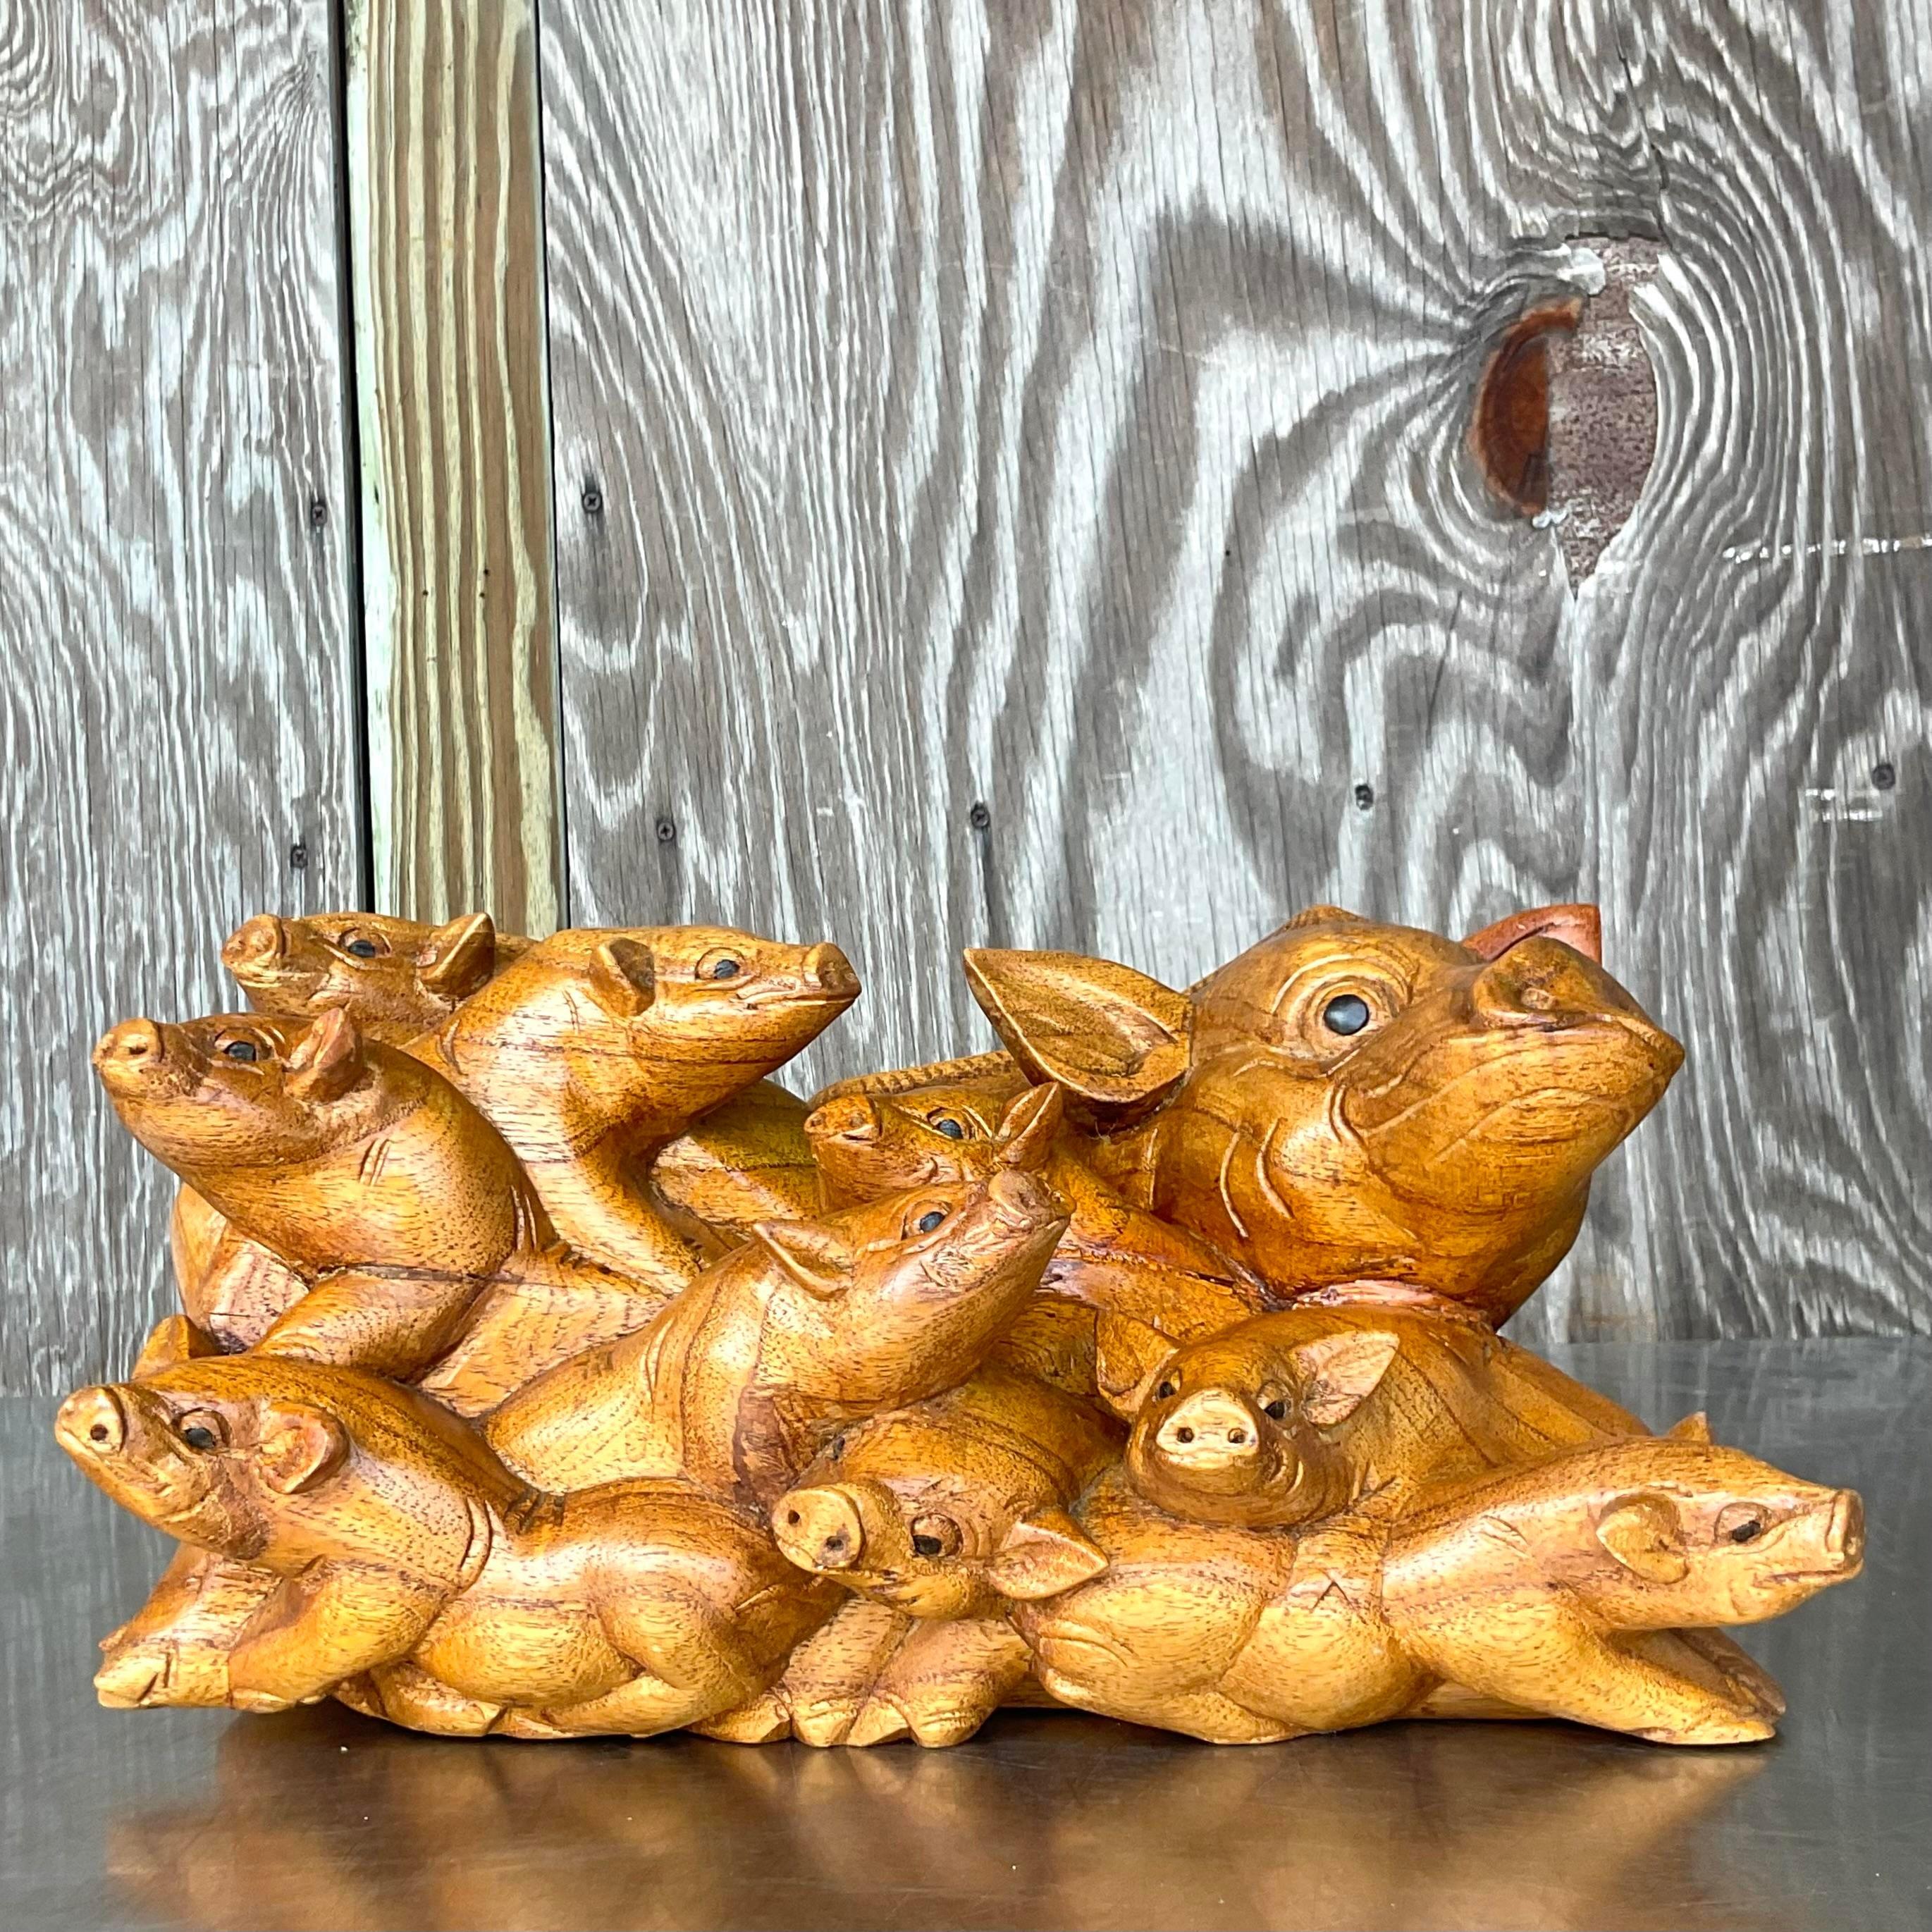 Capture the rustic charm of Americana with our Vintage Boho Hand Carved Pig Family. Each piece meticulously crafted, these whimsical carvings celebrate the warmth of family and the artistry of handwork. Perfect for adding a touch of playful